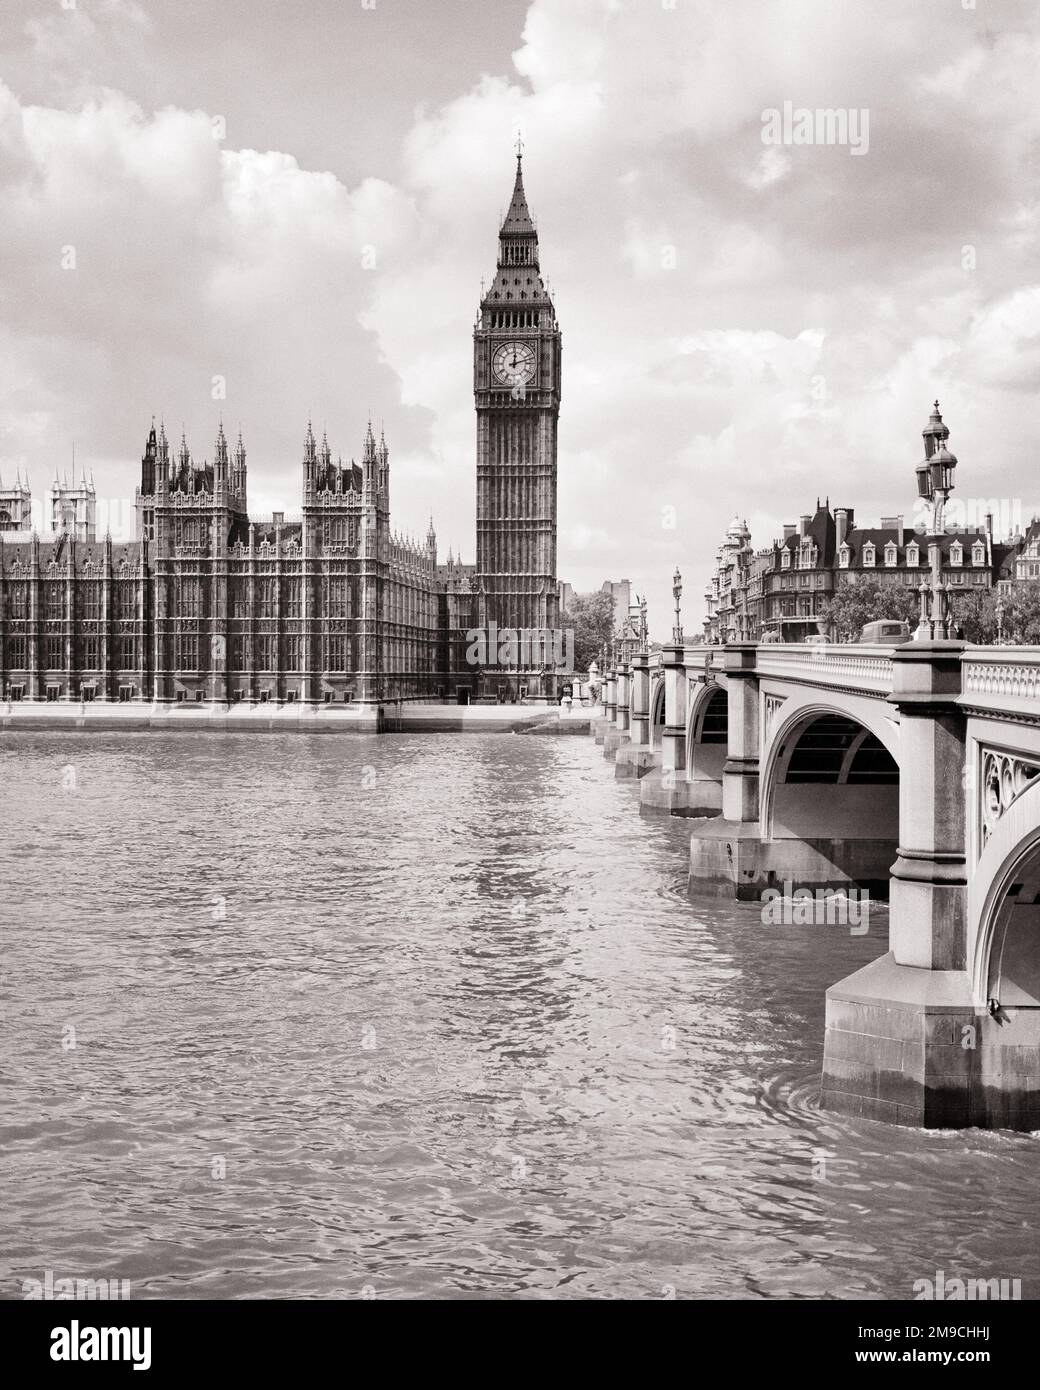 1960s BIG BEN THE HOUSES OF PARLIAMENT AND WESTMINSTER BRIDGE ACROSS THE THAMES RIVER LONDON ENGLAND UK - r17745 HAR001 HARS WESTMINSTER POLITICS BEN CAPITAL REAL ESTATE CONCEPT CONNECTION MOTION BLUR CONCEPTUAL STRUCTURES ACROSS CITIES EDIFICE SYMBOLIC CITY OF WESTMINSTER CONCEPTS SPAN BLACK AND WHITE BRIDGES GREAT BRITAIN HAR001 ICONIC JOIN OLD FASHIONED PARLIAMENT REPRESENTATION THAMES UNESCO UNITED KINGDOM WORLD HERITAGE SITE Stock Photo